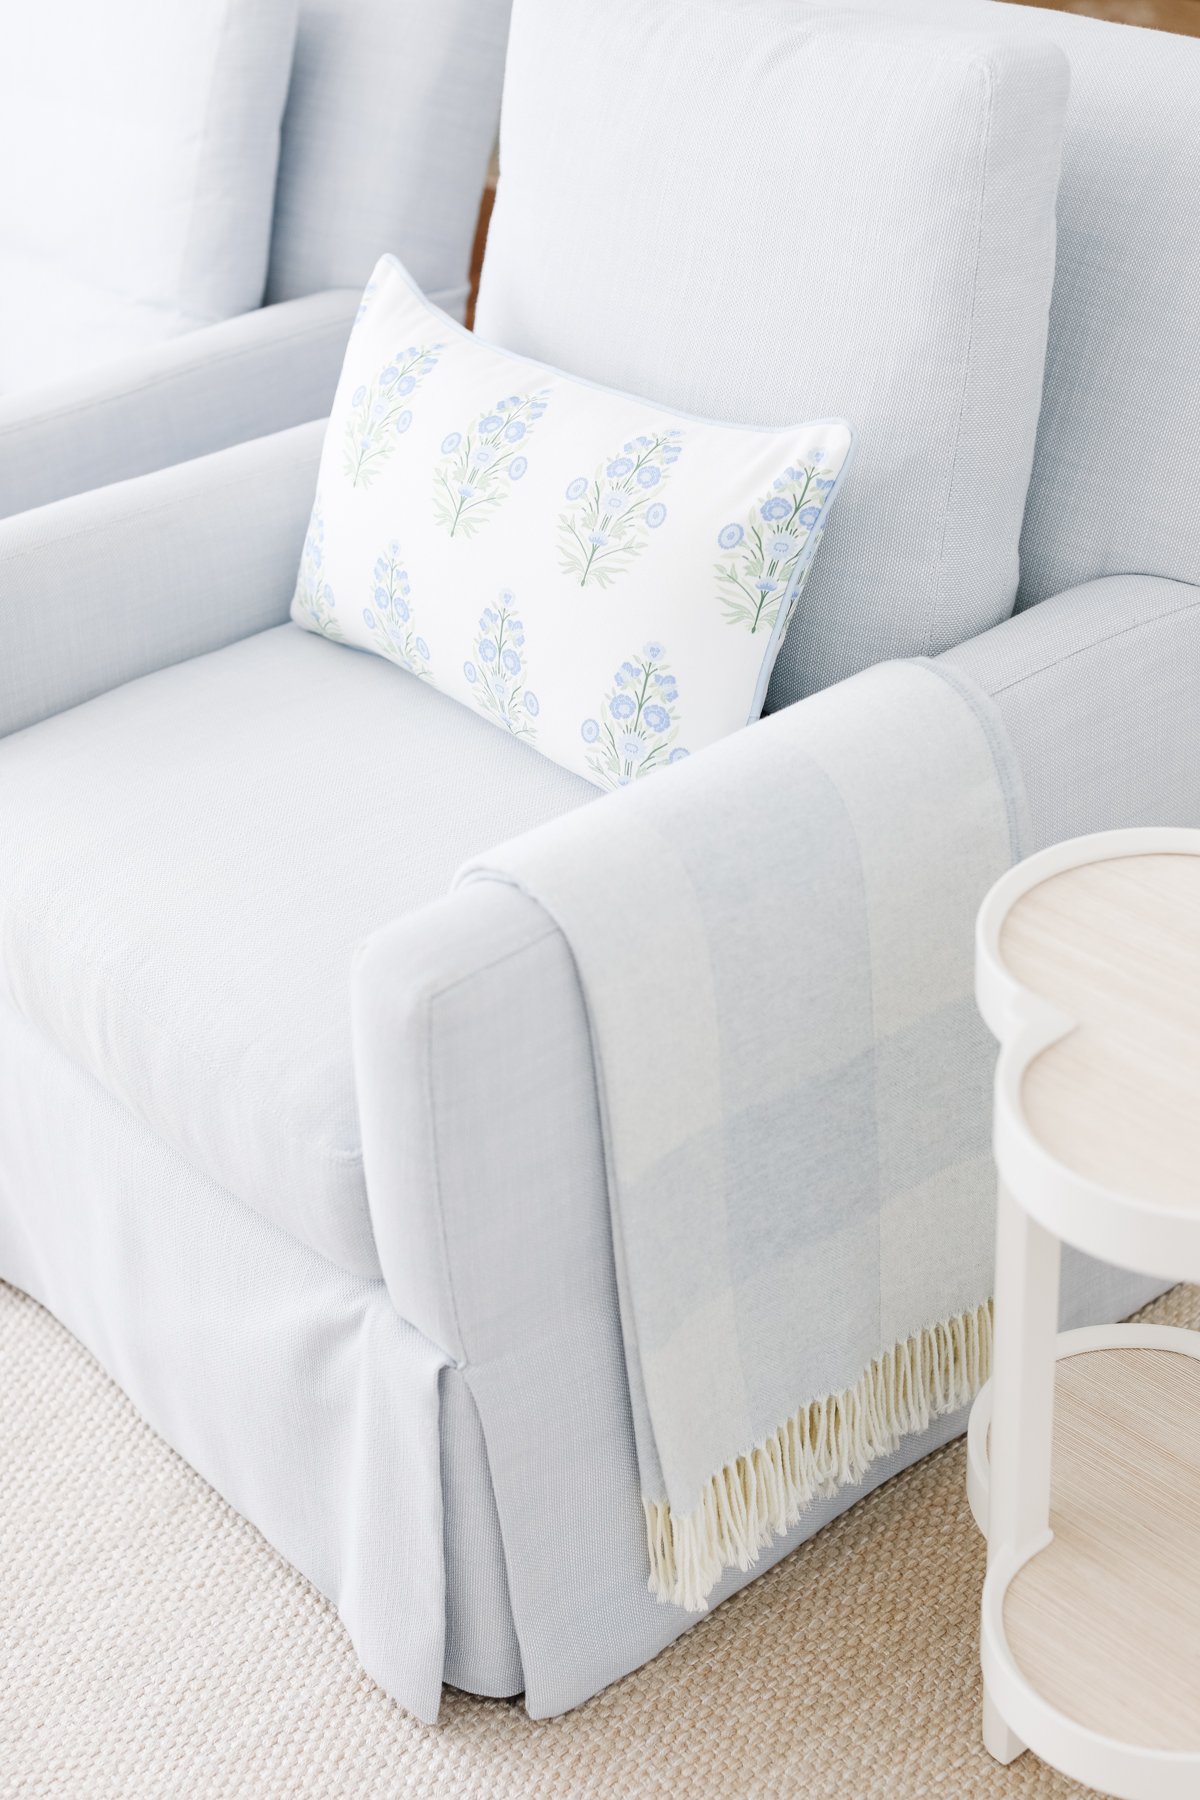 A light blue armchair with a floral print pillow and a checkered throw blanket draped over the arm, next to a small white side table.